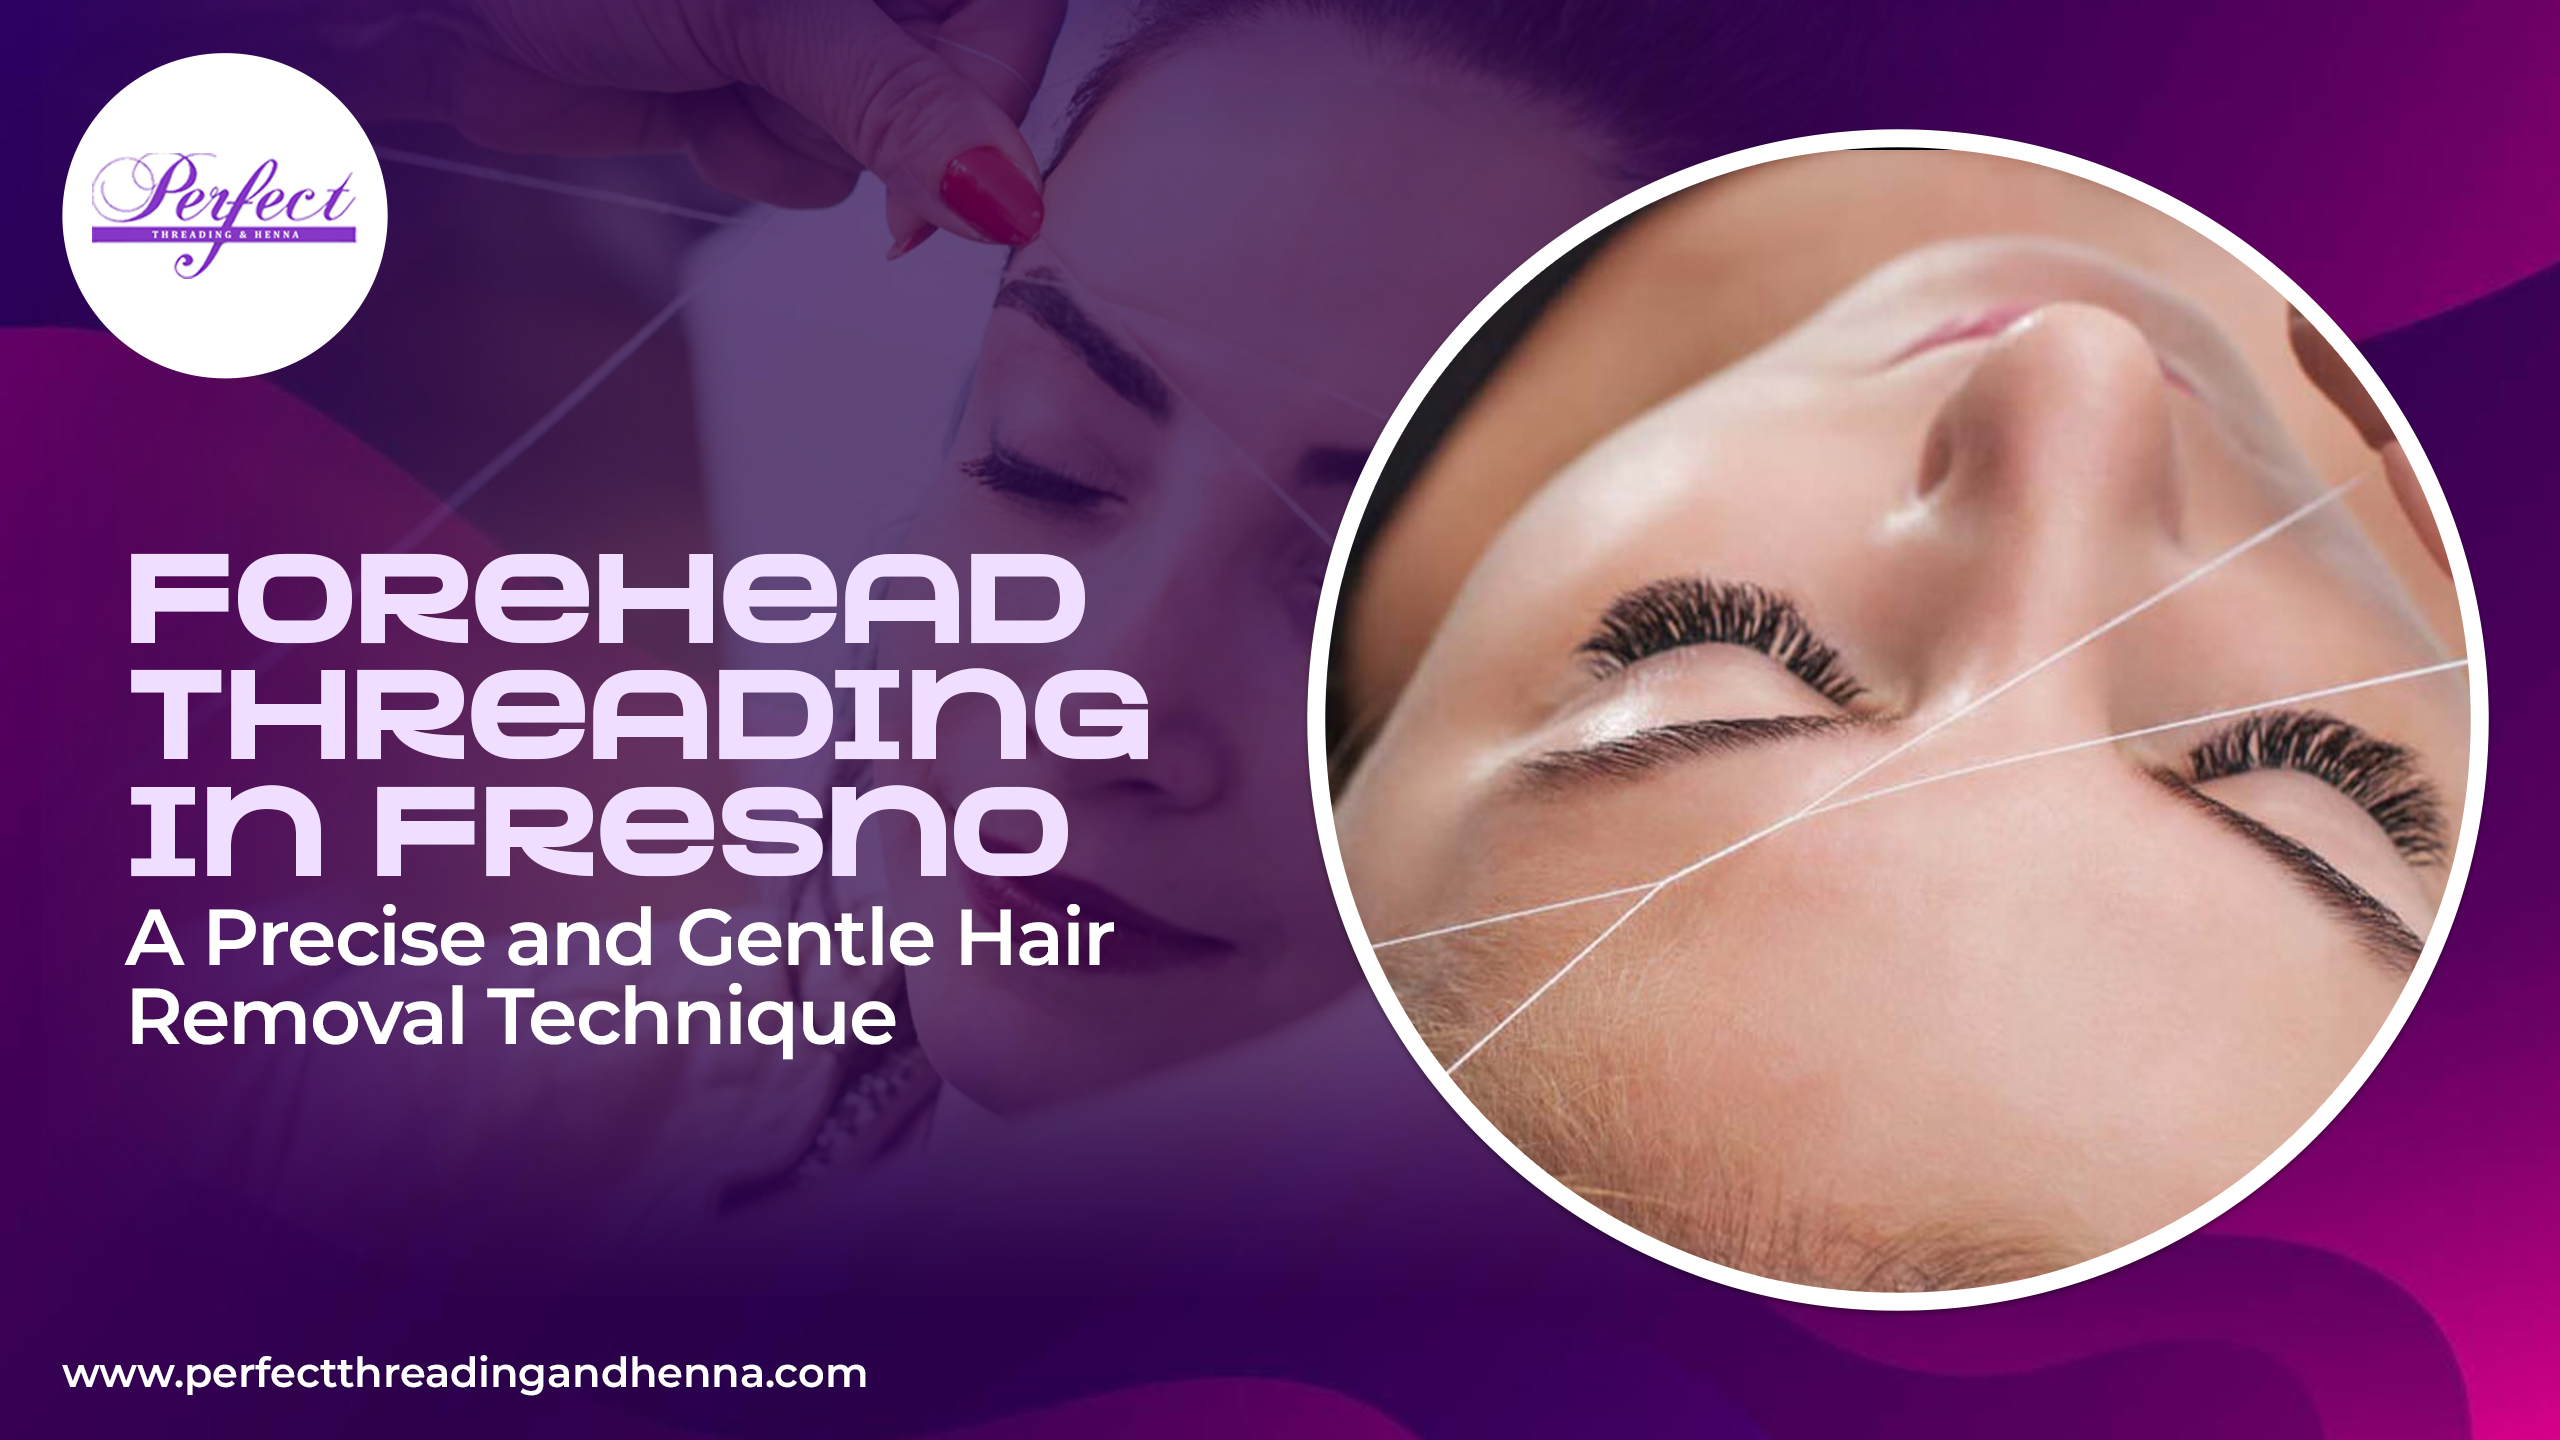 Forehead Threading in Fresno: A Precise and Gentle Hair Removal Technique